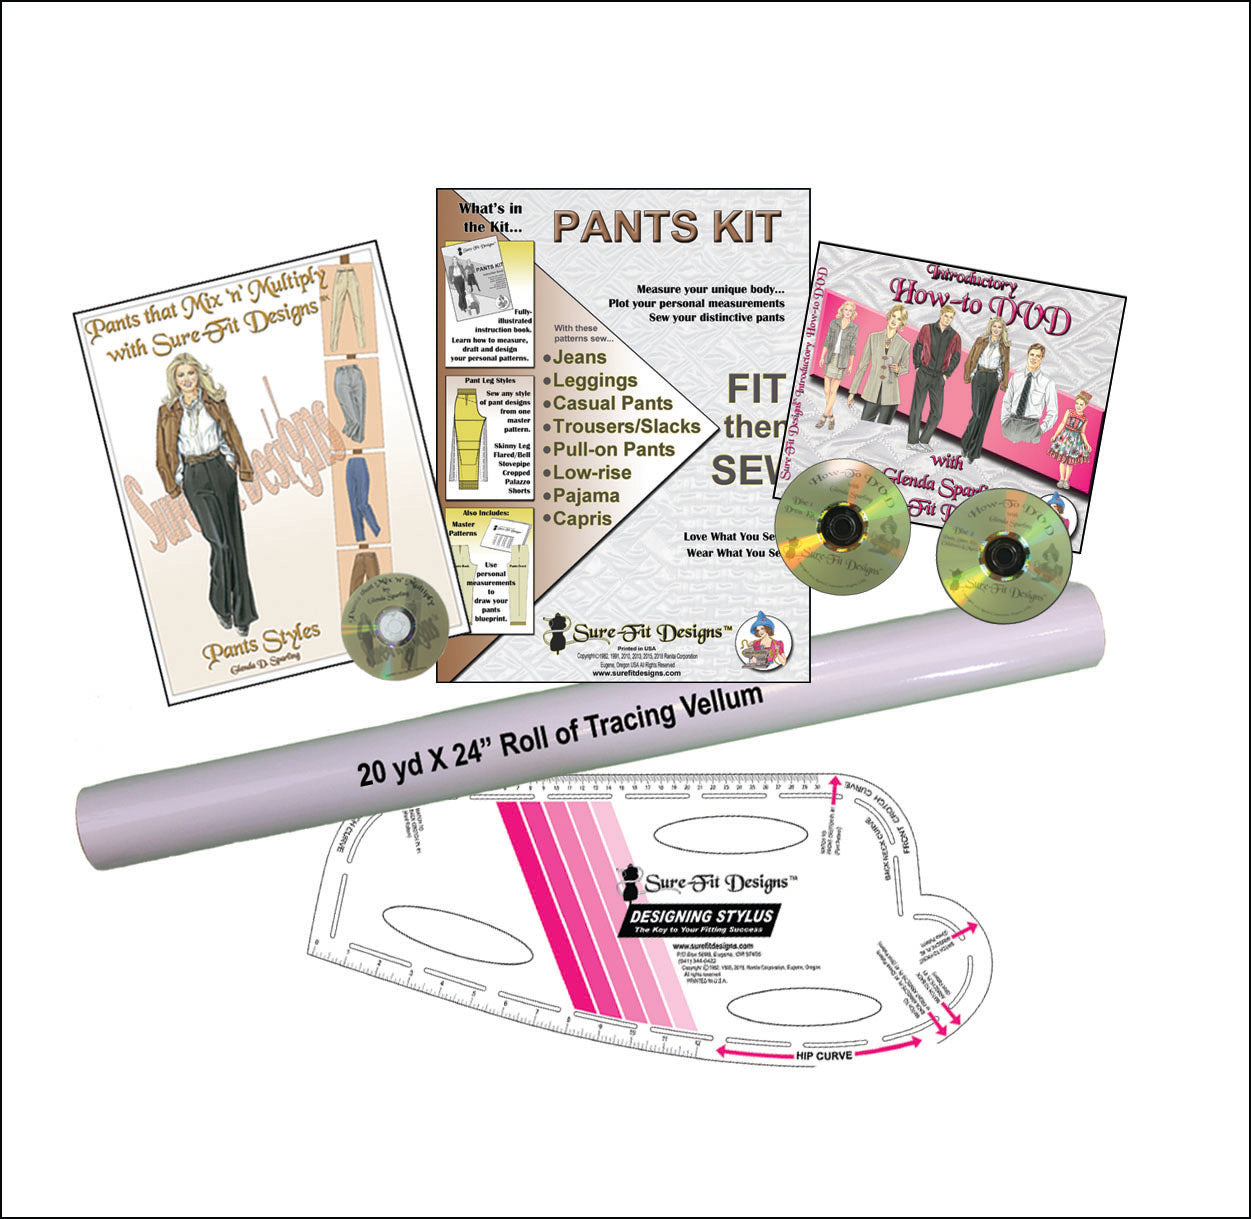 Pants that Mix 'n Multiply - Designing Book